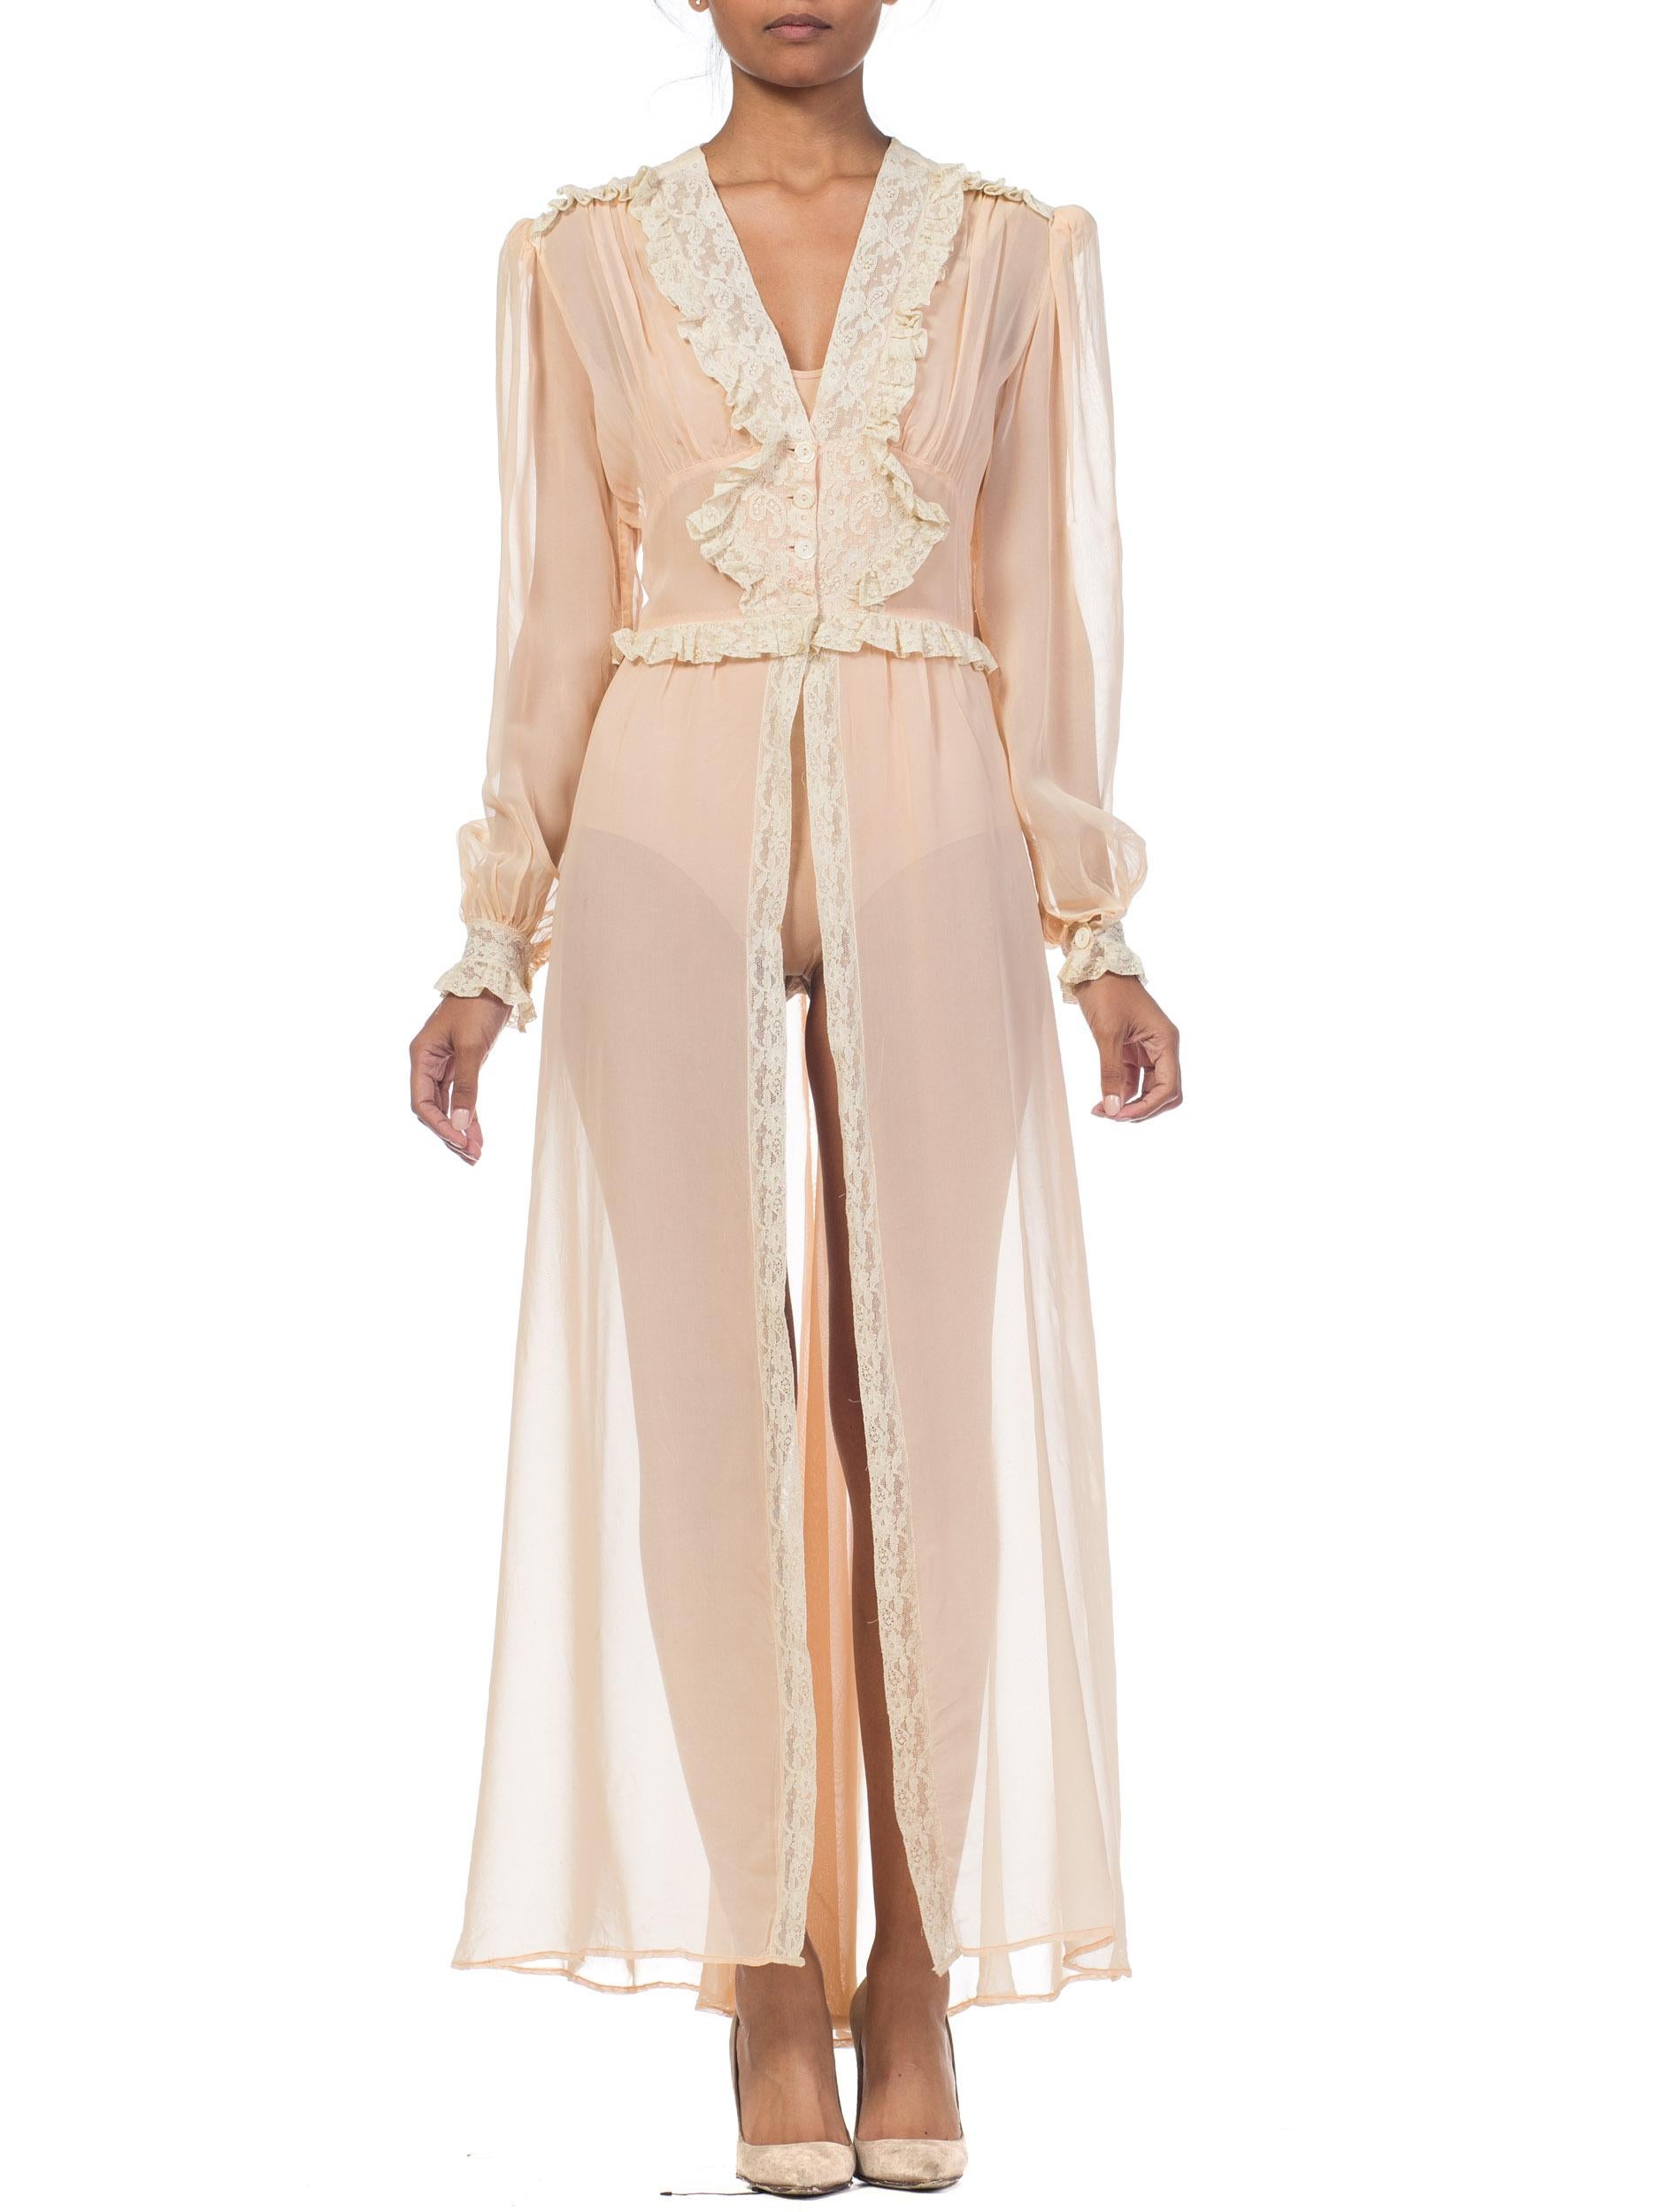 1940S Blush Pink Rayon Chiffon Sheer Peignoir Robe With Lace Ruffles & Mother Of Pearl Buttons